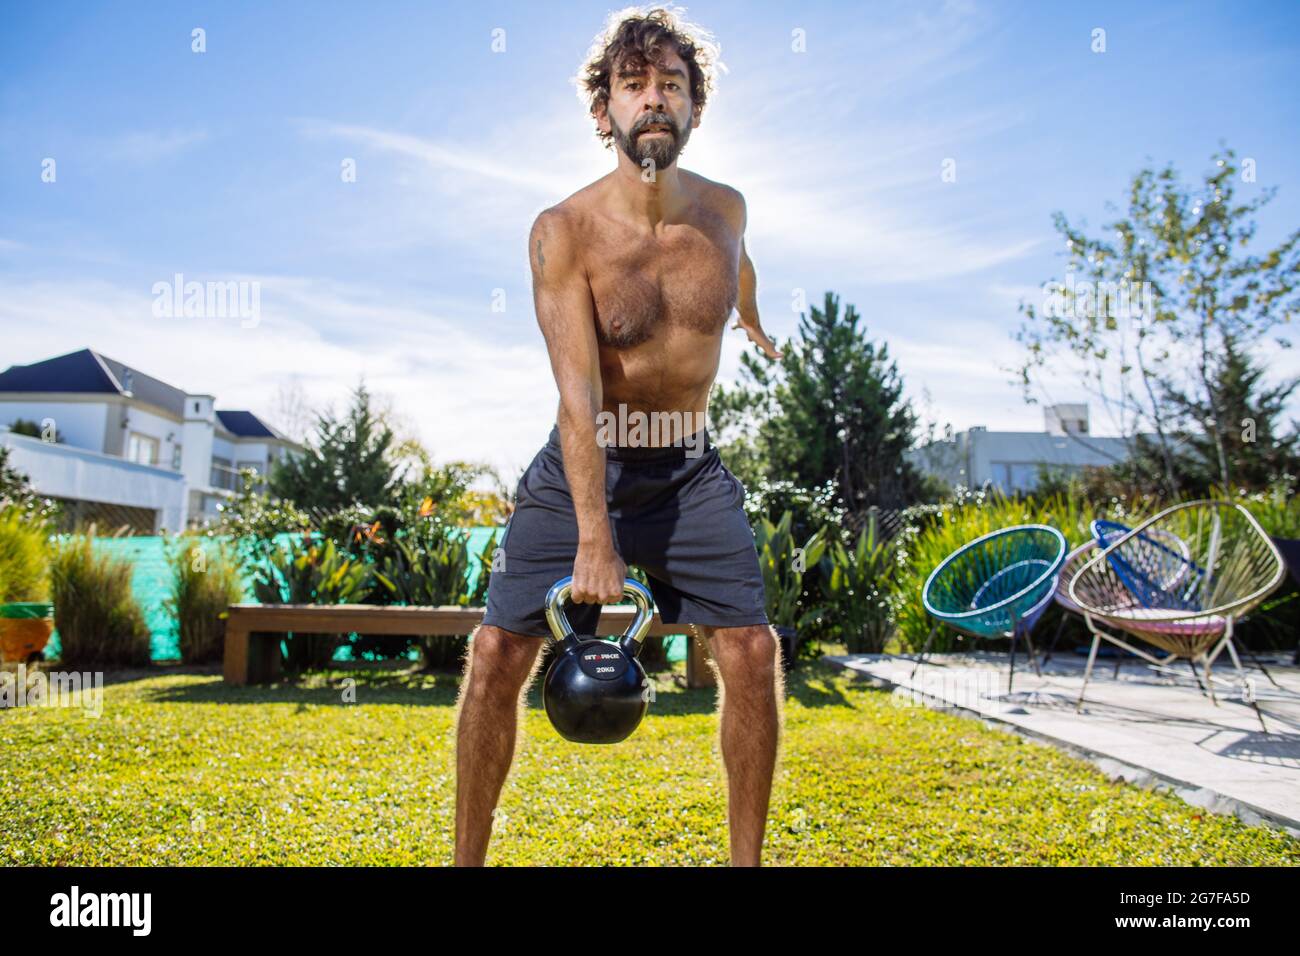 Middle age man training crossfit and weightlifting in his backyard Stock Photo